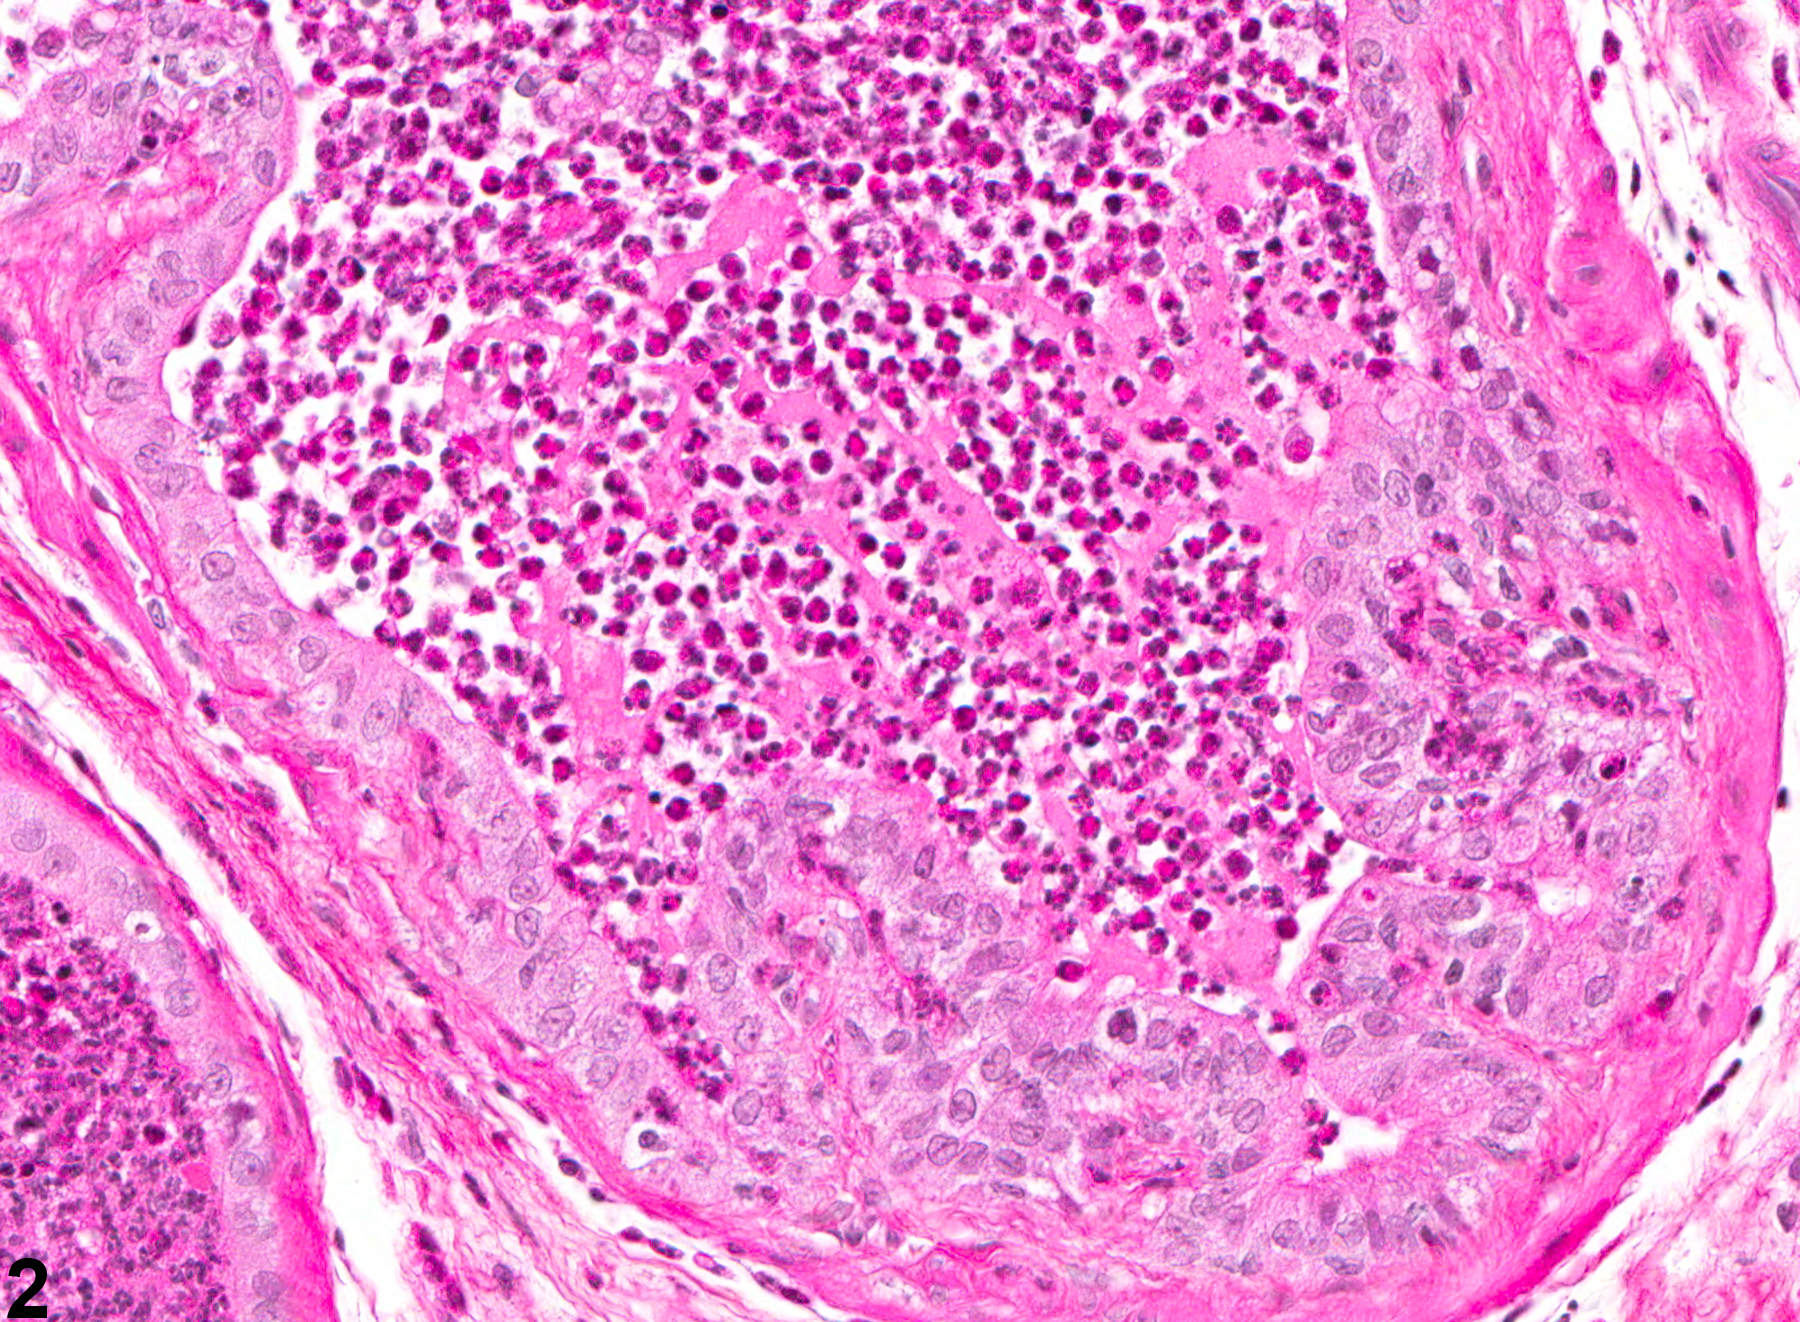 Image of acute inflammation in the coagulating gland from a male Wistar rat in a chronic study